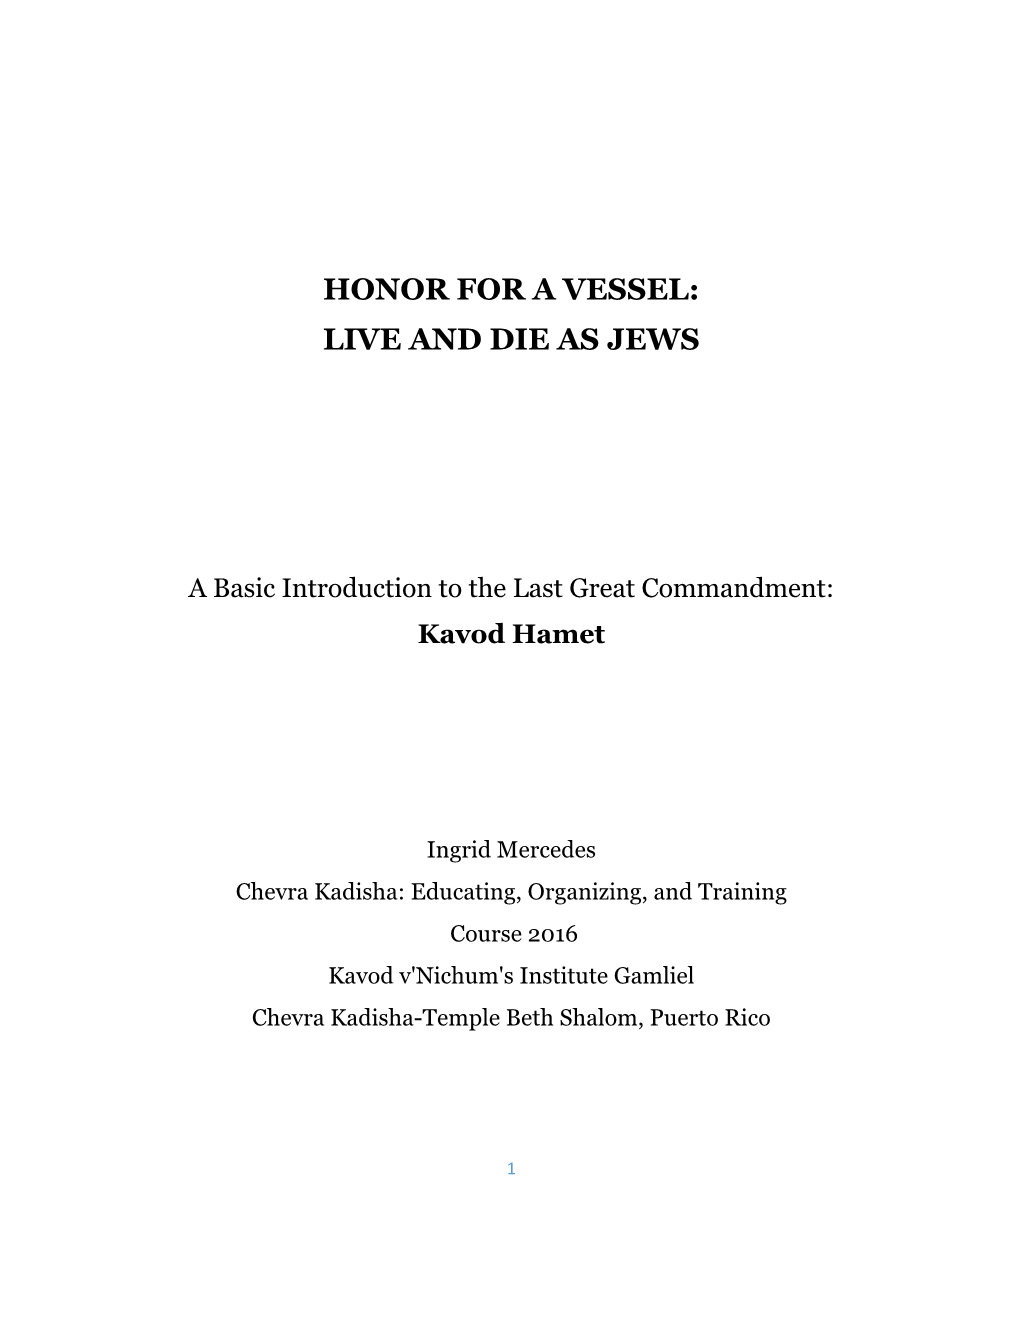 Honor for a Vessel: Live and Die As Jews